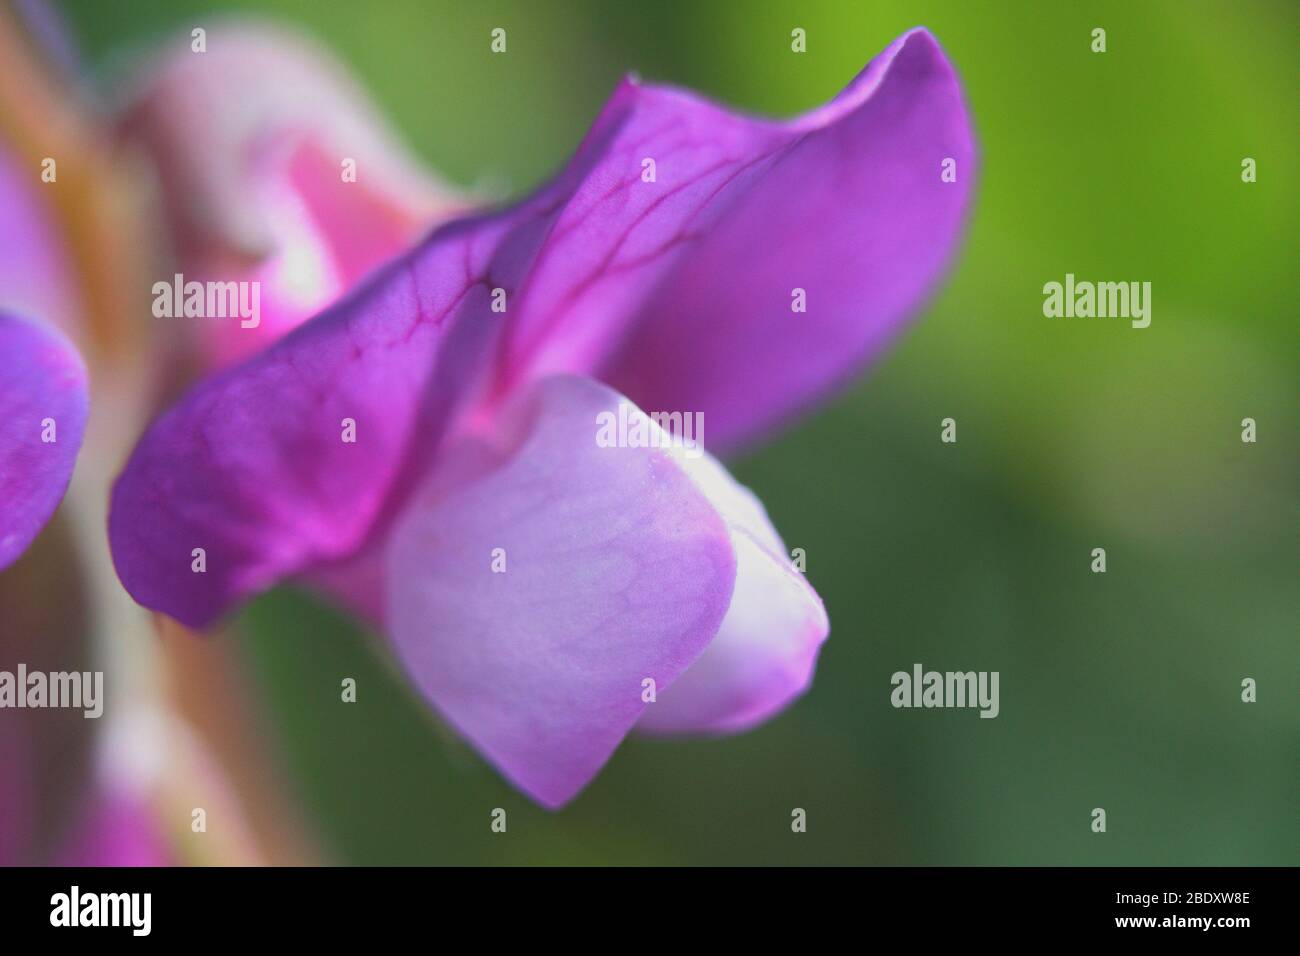 Beach Pea pink flower extreme close up Stock Photo